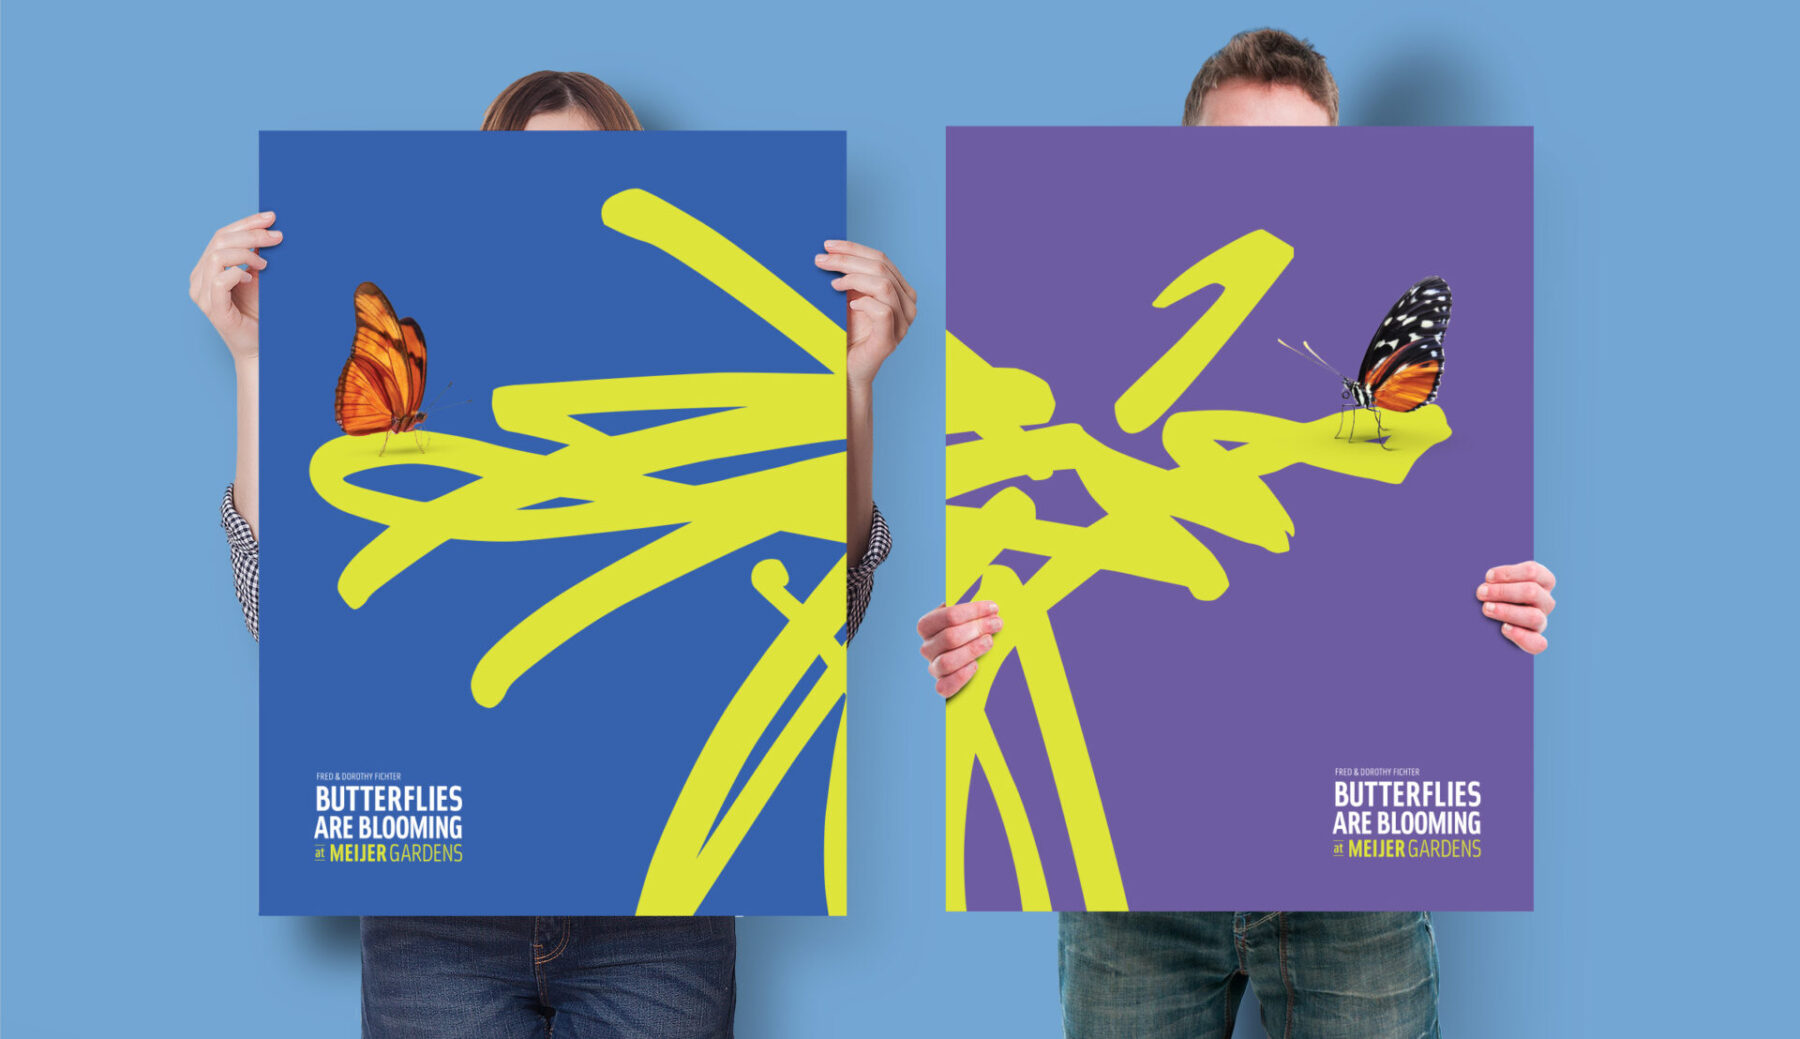 Fred & Dorothy Fichter Butterflies are Blooming at Meijer Gardens poster set with icon spanning both posters.